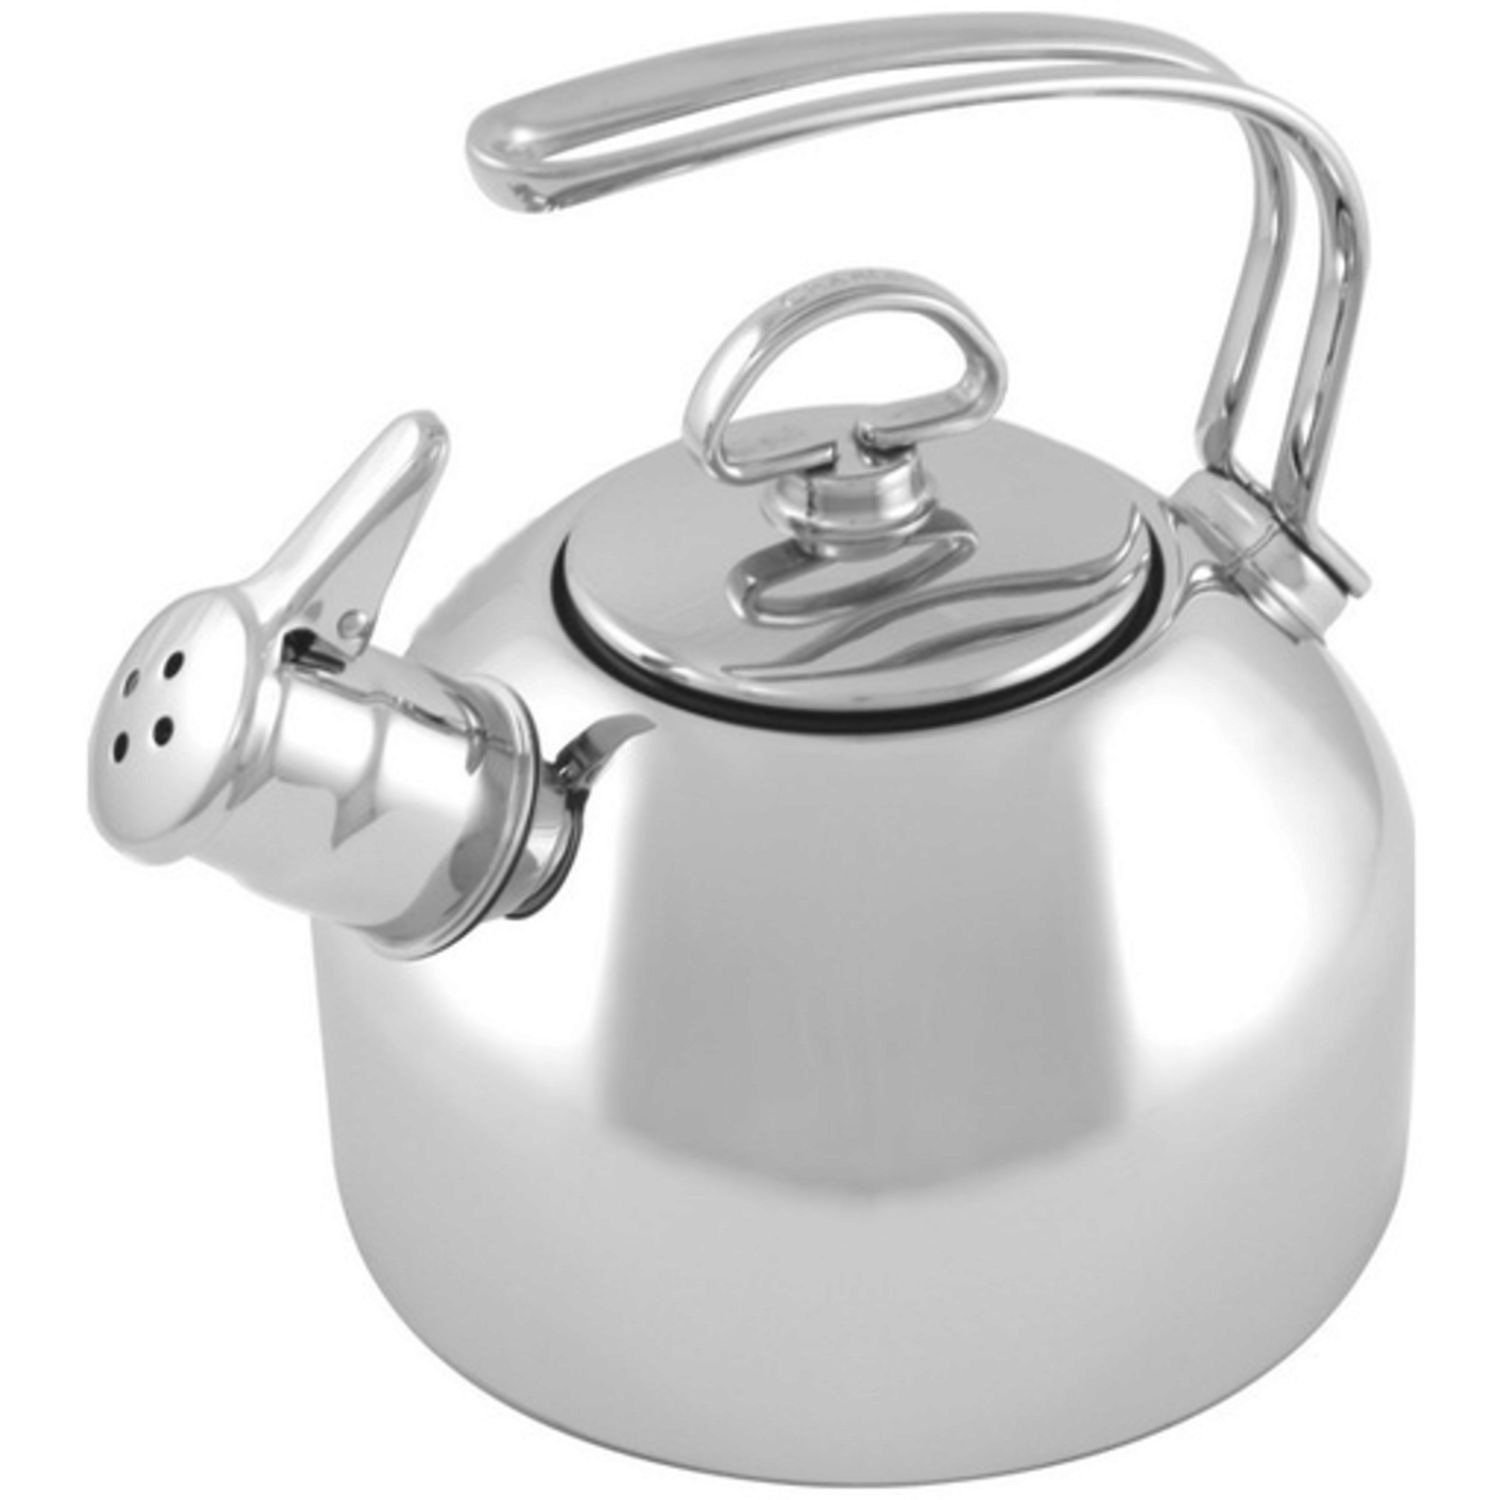 OXO Pick Me Up Tea Kettle 1.8 Qt Stainless Steel